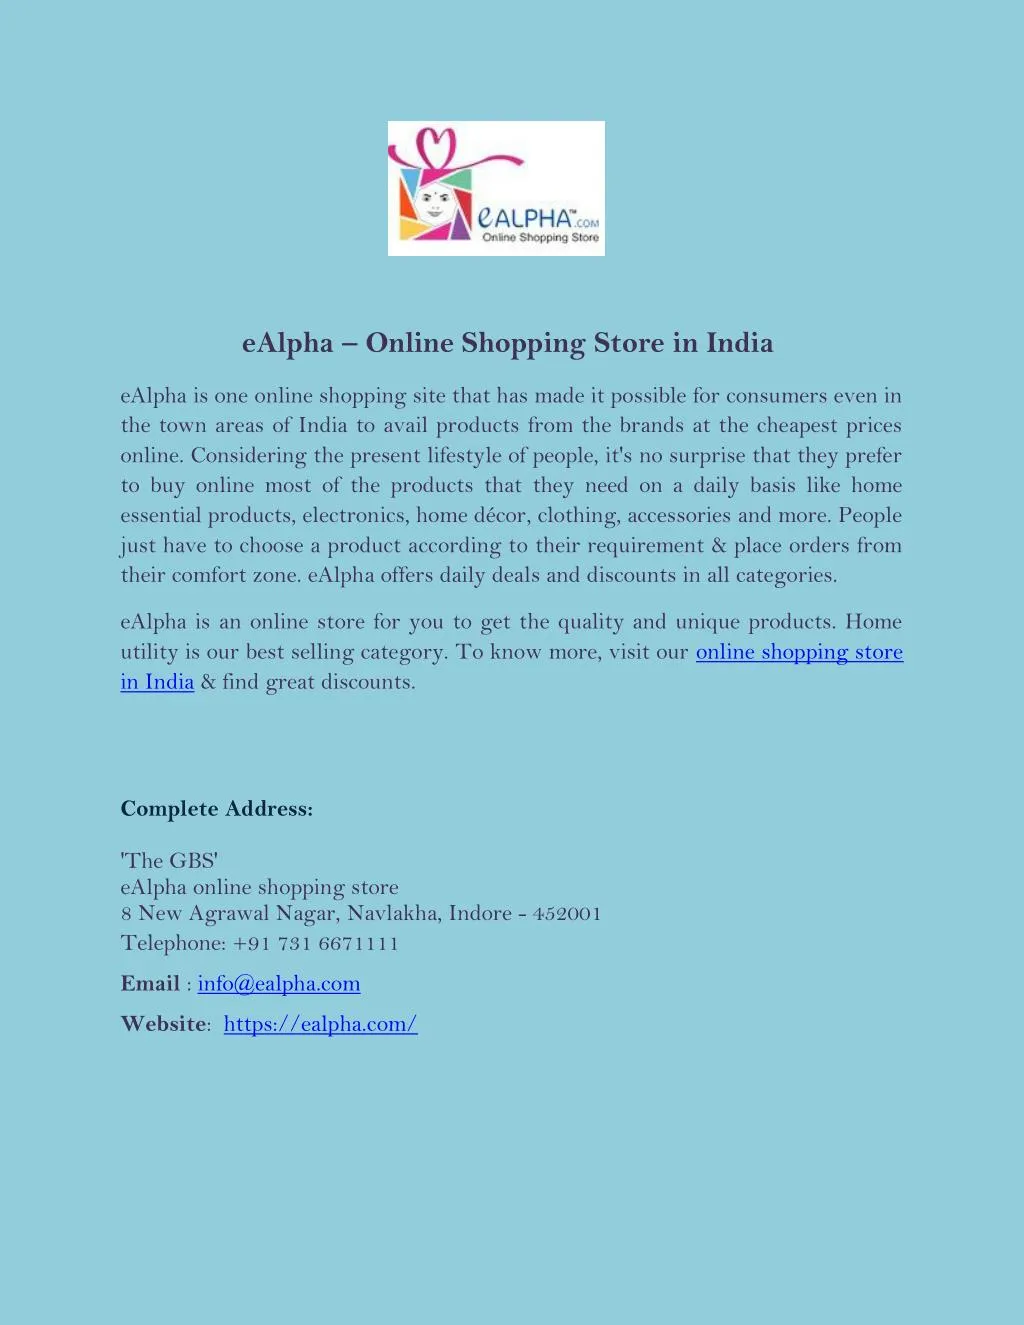 ealpha online shopping store in india